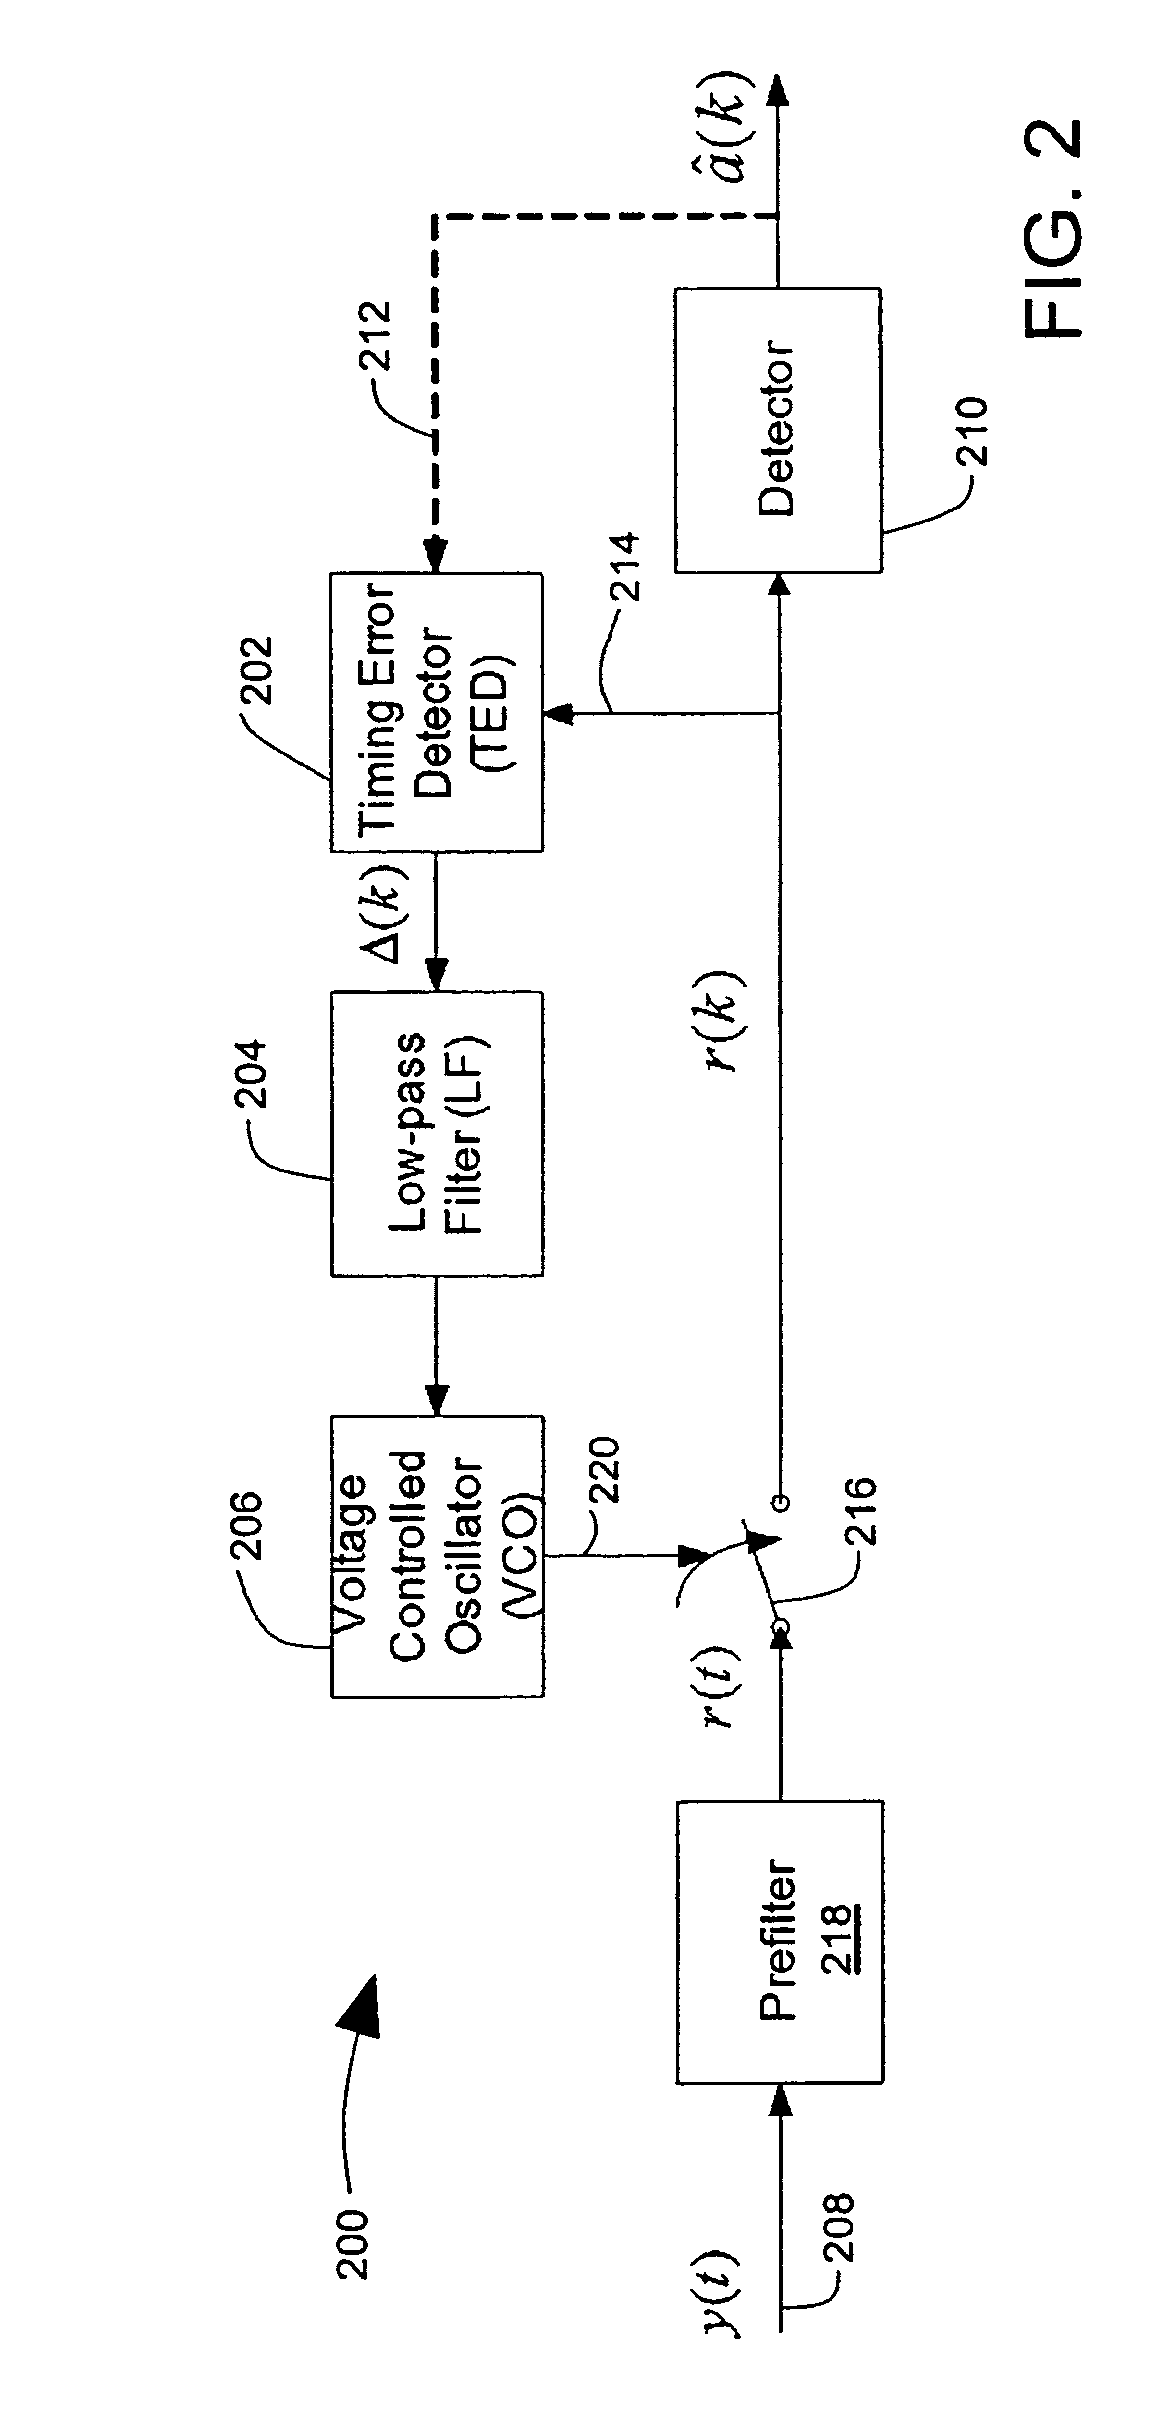 Timing recovery in a parallel channel communication system